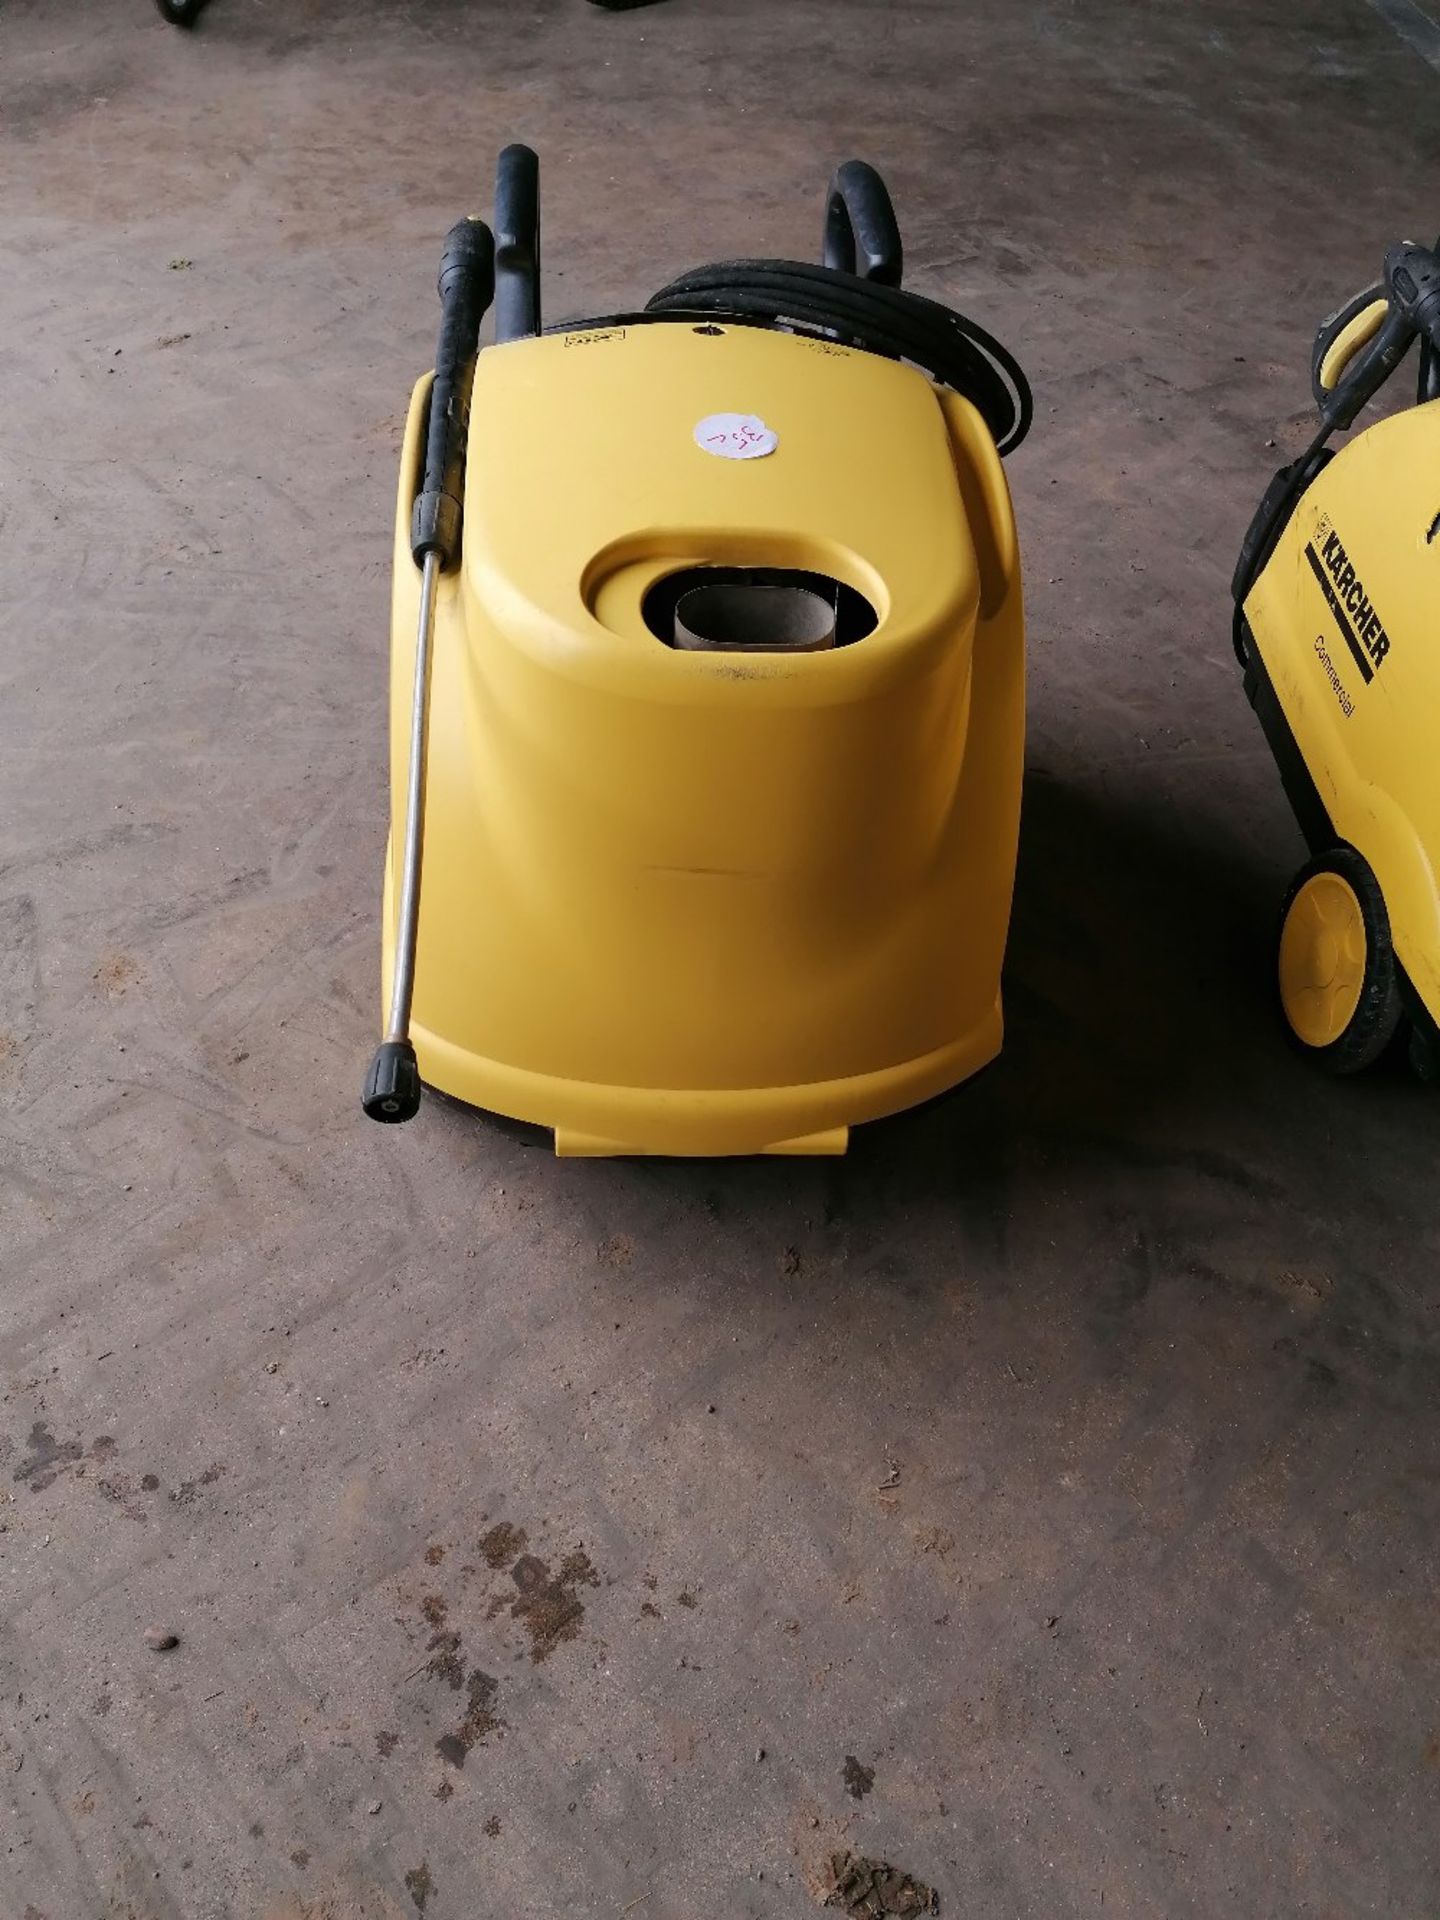 Karcher HDS 601 C Hot water pressure washer. No VAT on this item. - Image 2 of 2